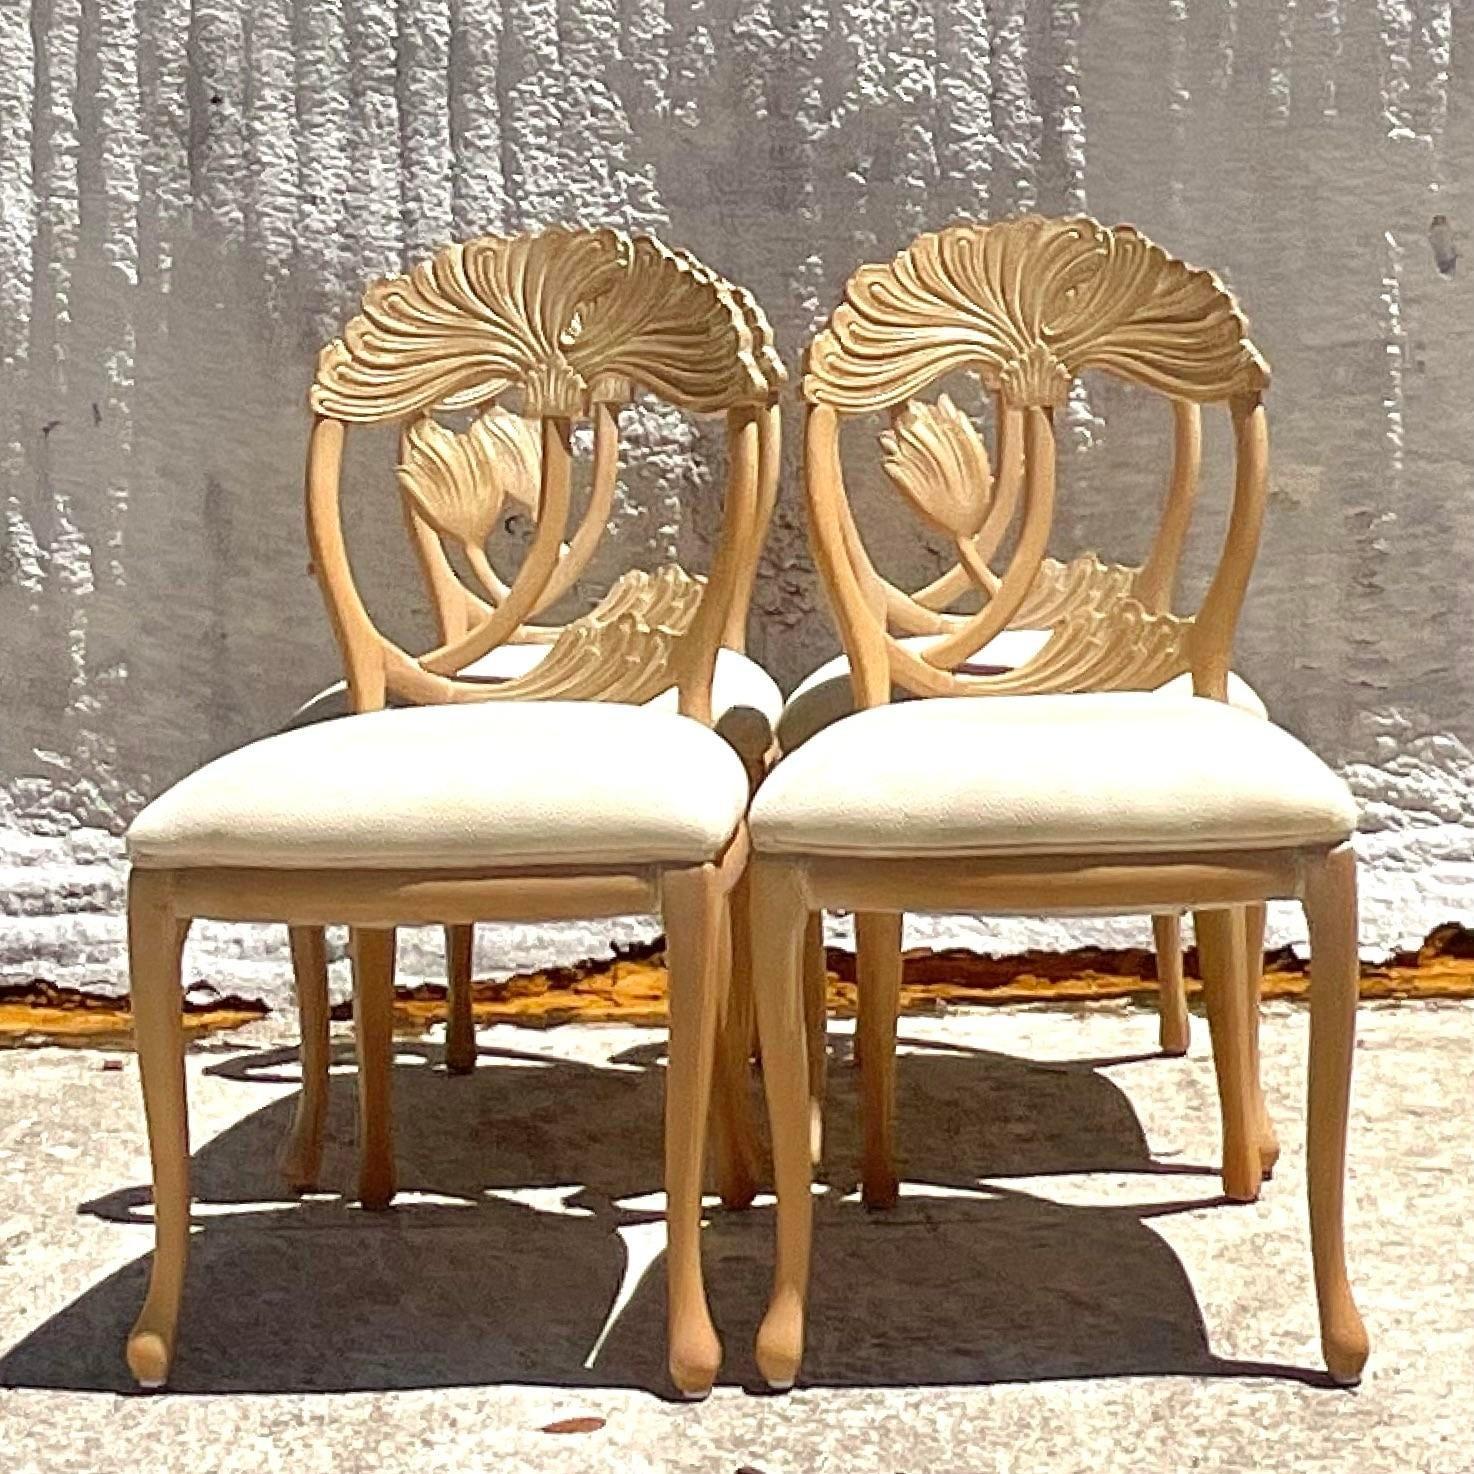 Vintage Boho Carved Lotus Blossom Dining Chairs - Set of 4 3